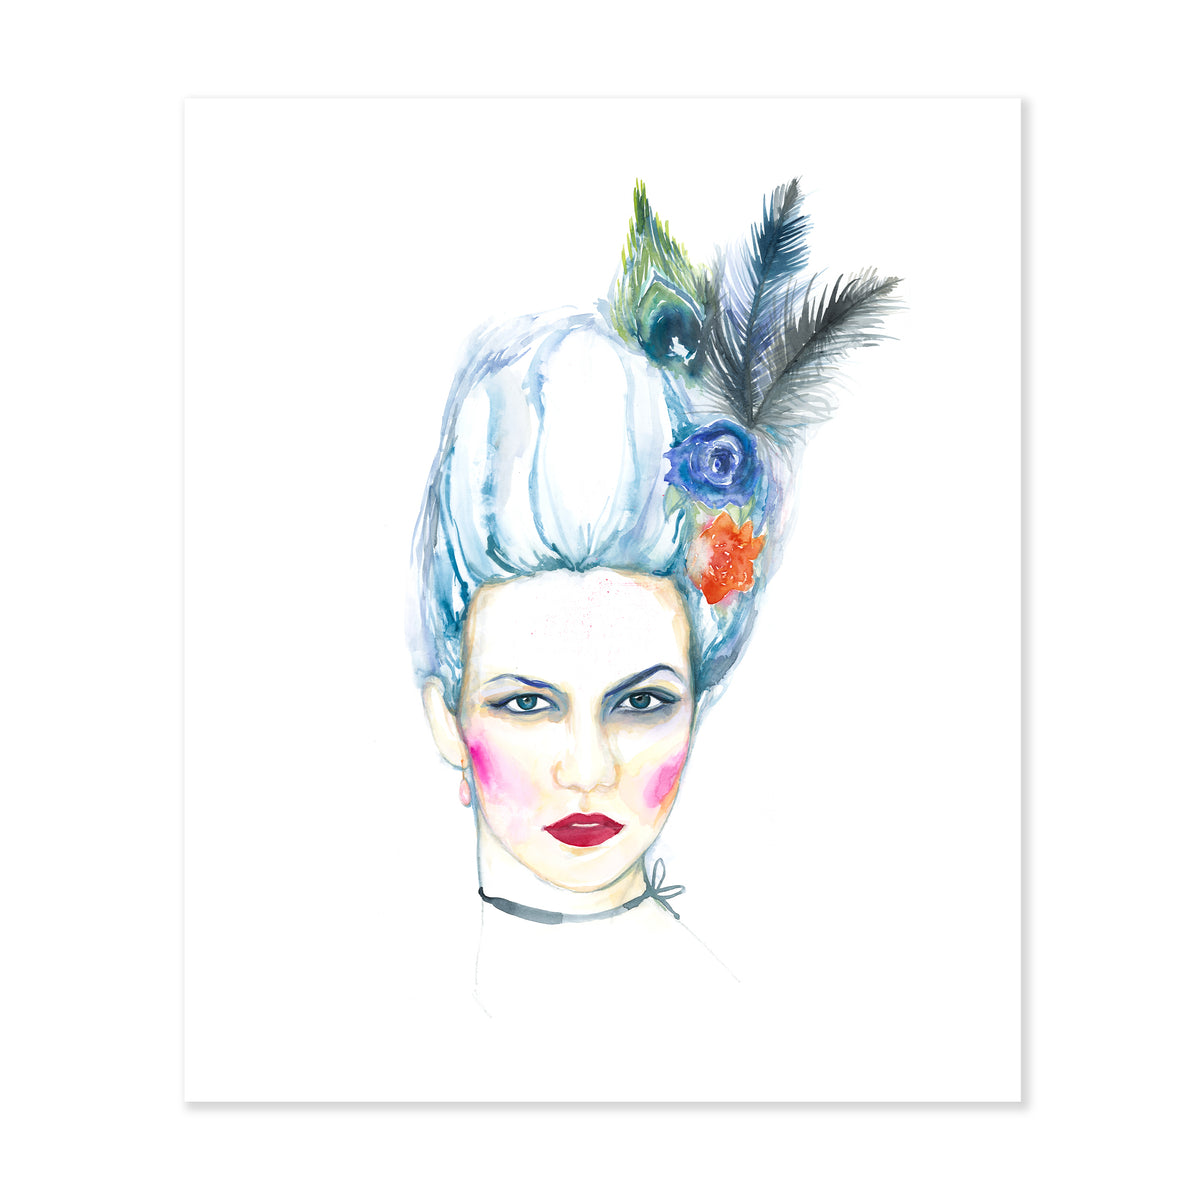 A fine art portrait of a woman in a tall updo with colorful feathers and rosettes in her hair and rouged lips and cheeks painted with watercolor on a soft white background